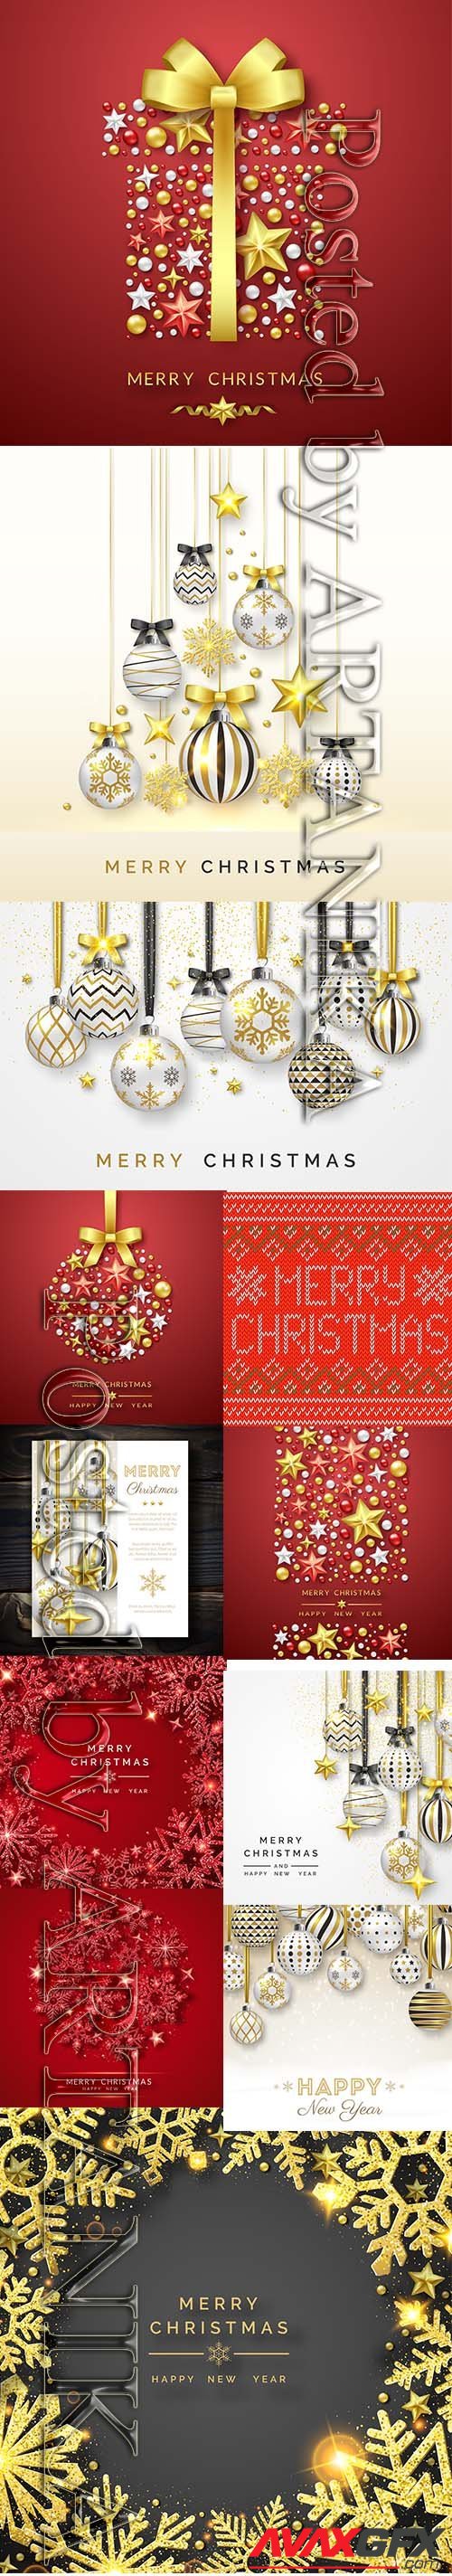 Merry Christmas and New Year 2020 Illustrations Pack Vol 7